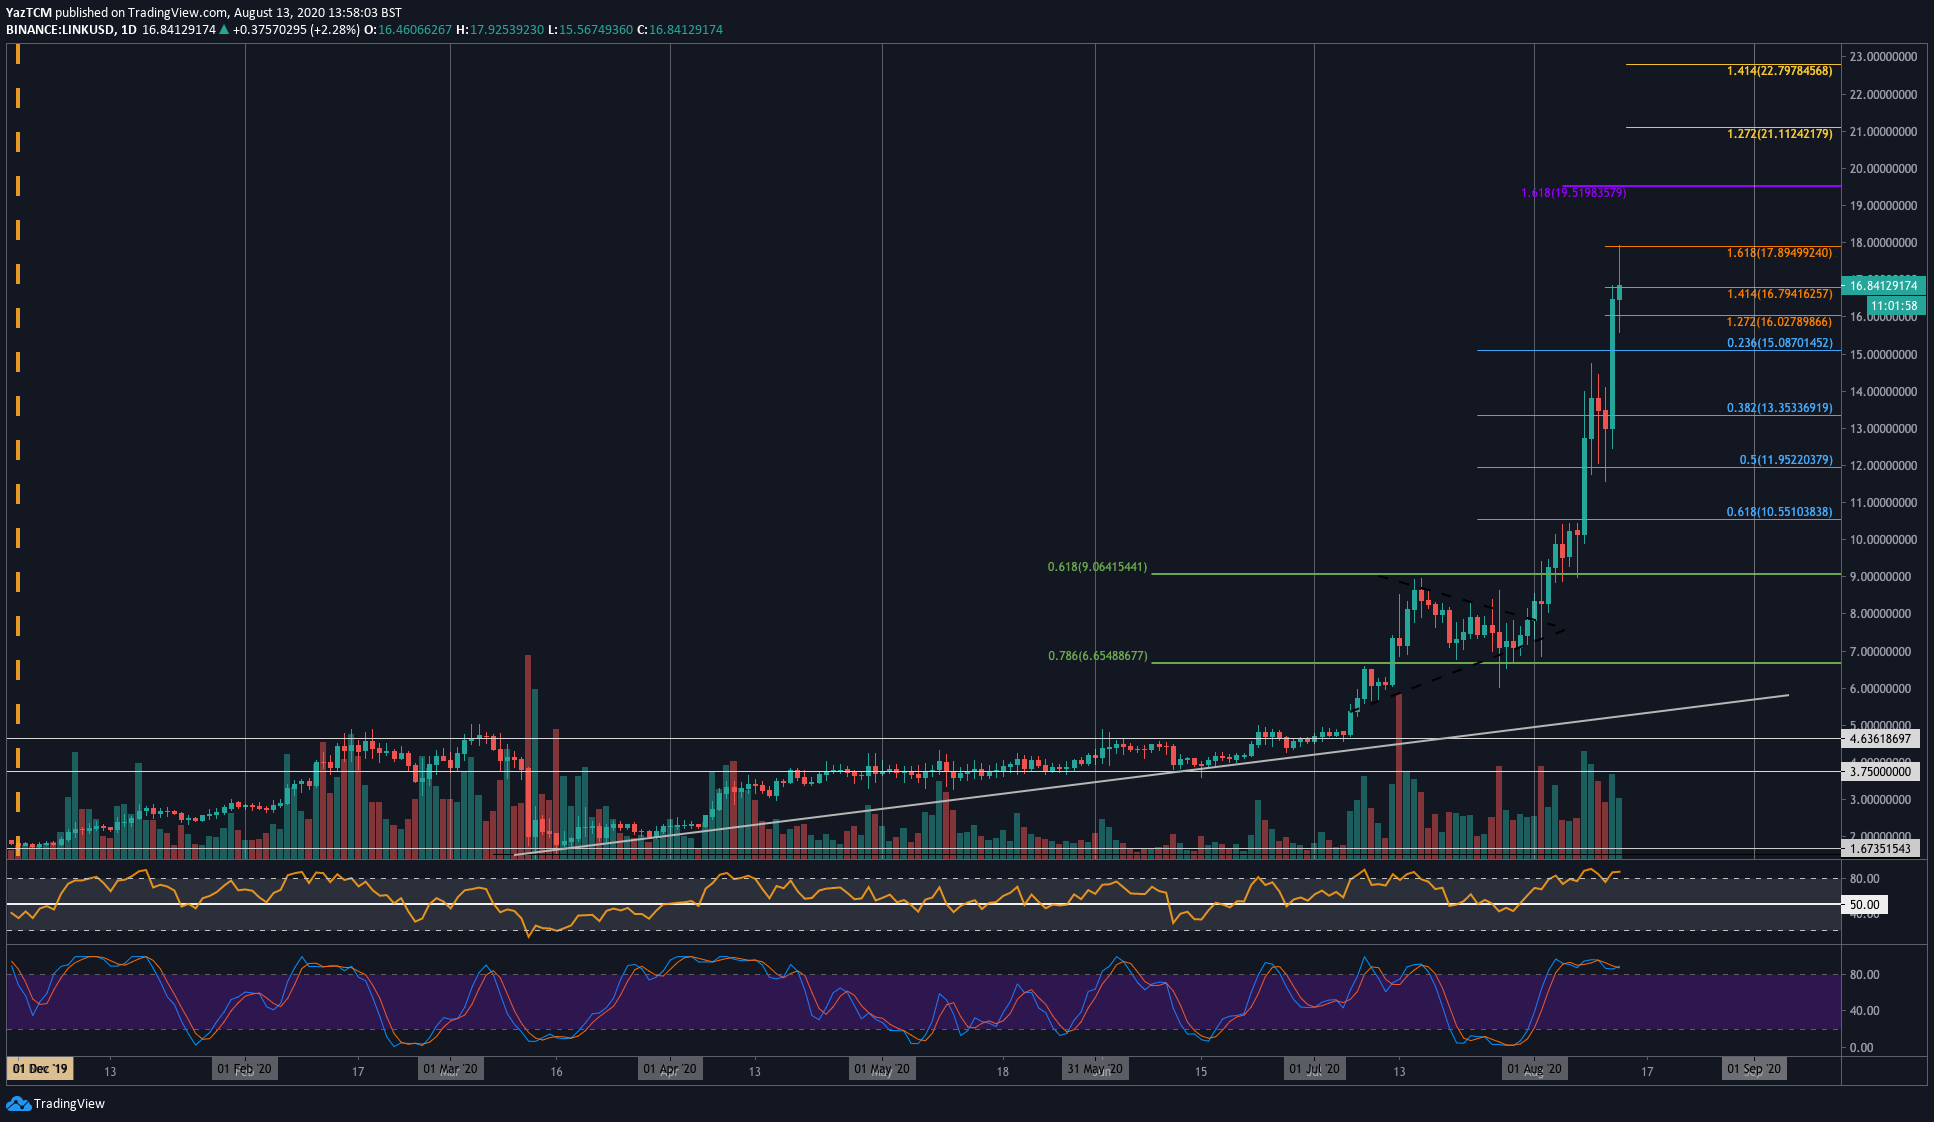 YAM Madness Drove LINK to New ATH Above $17, Will It Last? (Chainlink Price Analysis)